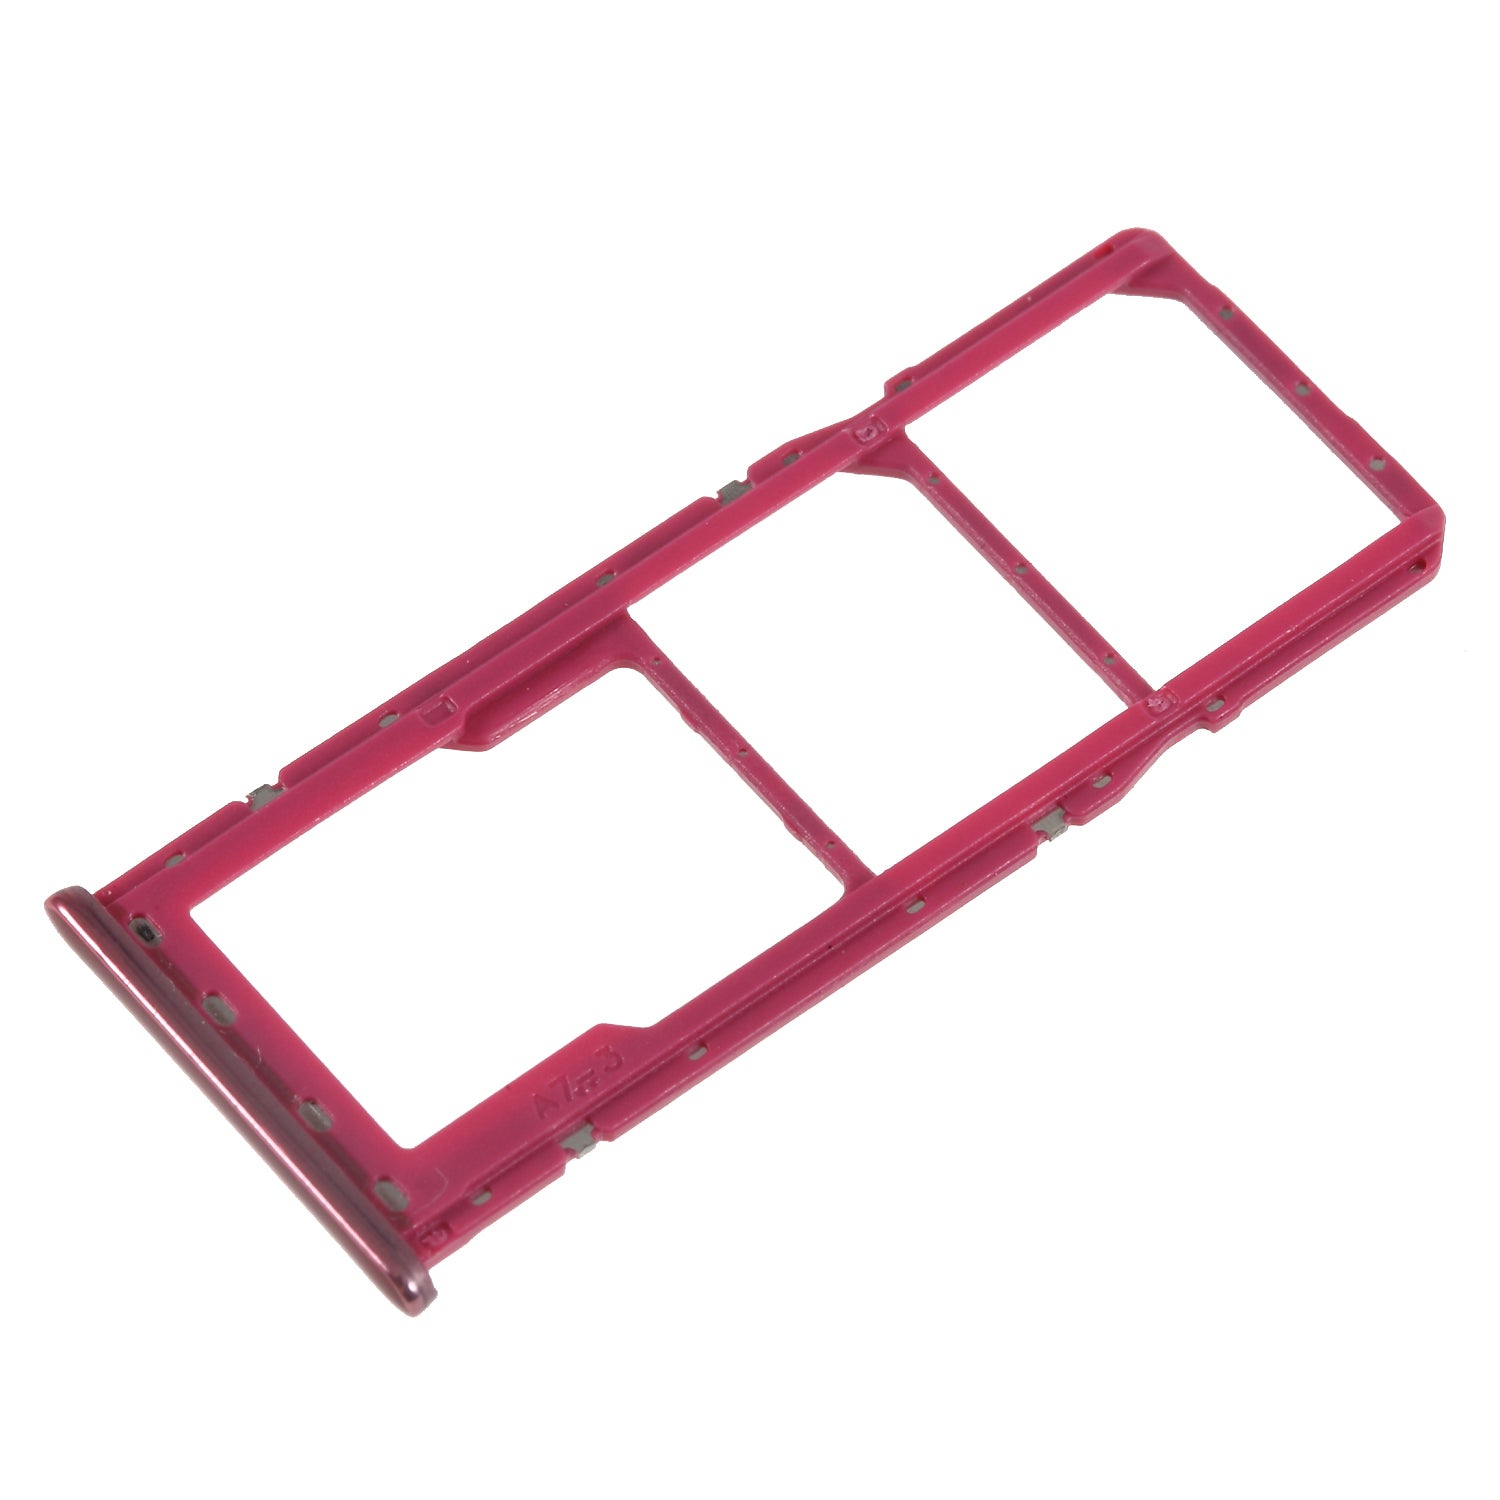 OEM for Samsung Galaxy A7 (2018) A750 Dual SIM + SD Card Tray Holder Part - Red